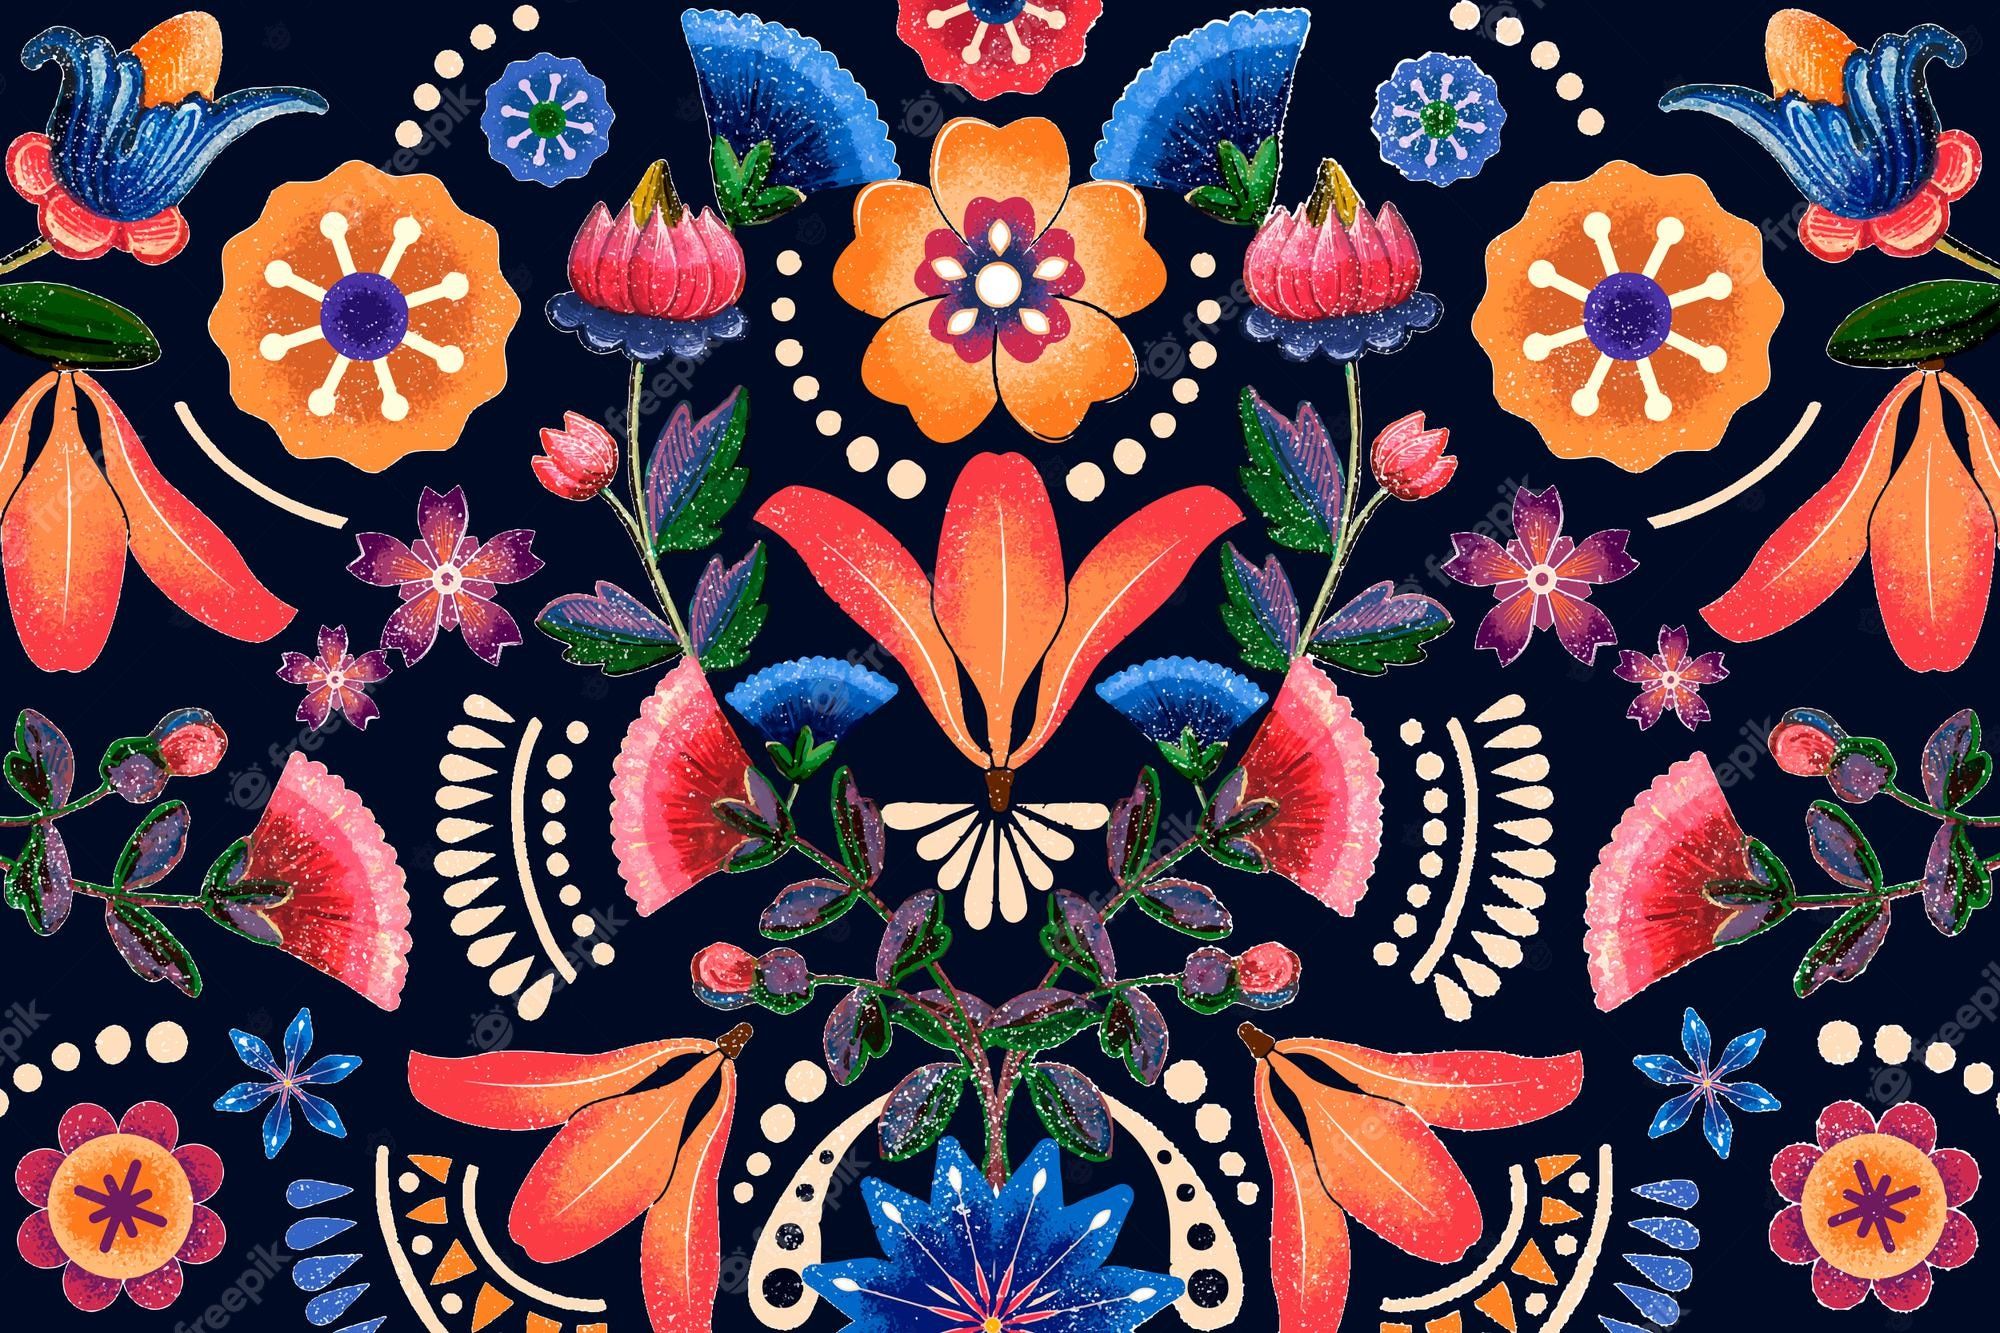 A colorful pattern with flowers and leaves on a dark blue background - Mexico